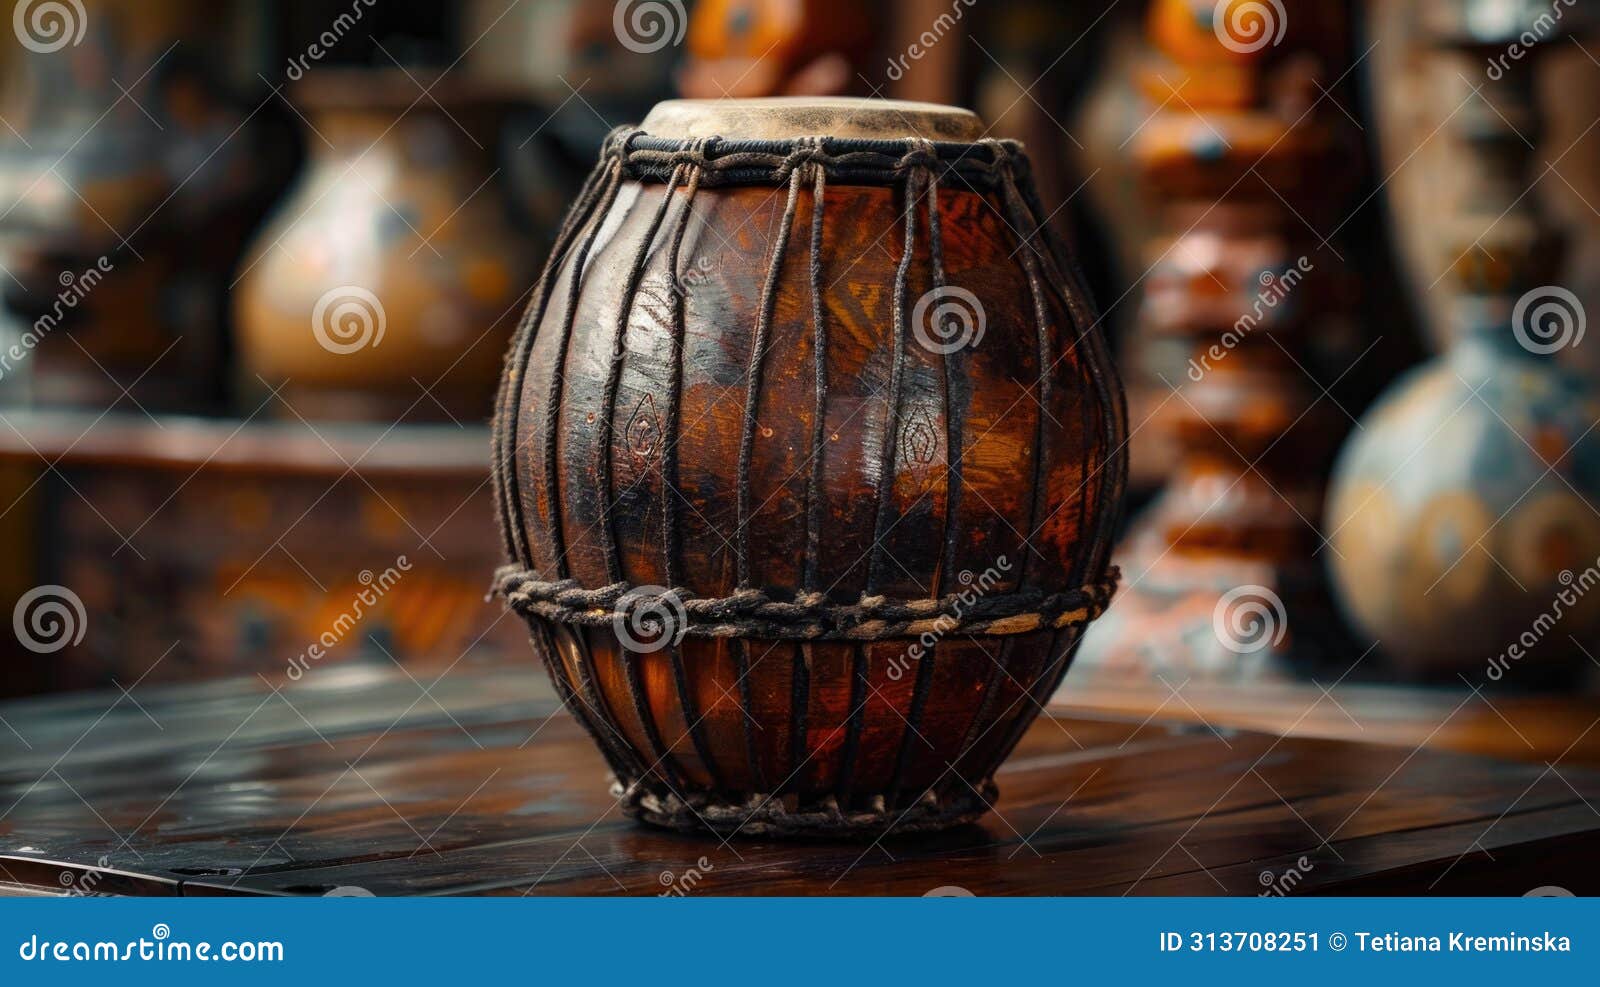 a crafted wooden "raban" drum, a traditional instrument used during sinhalese new year celebrations. the drum is